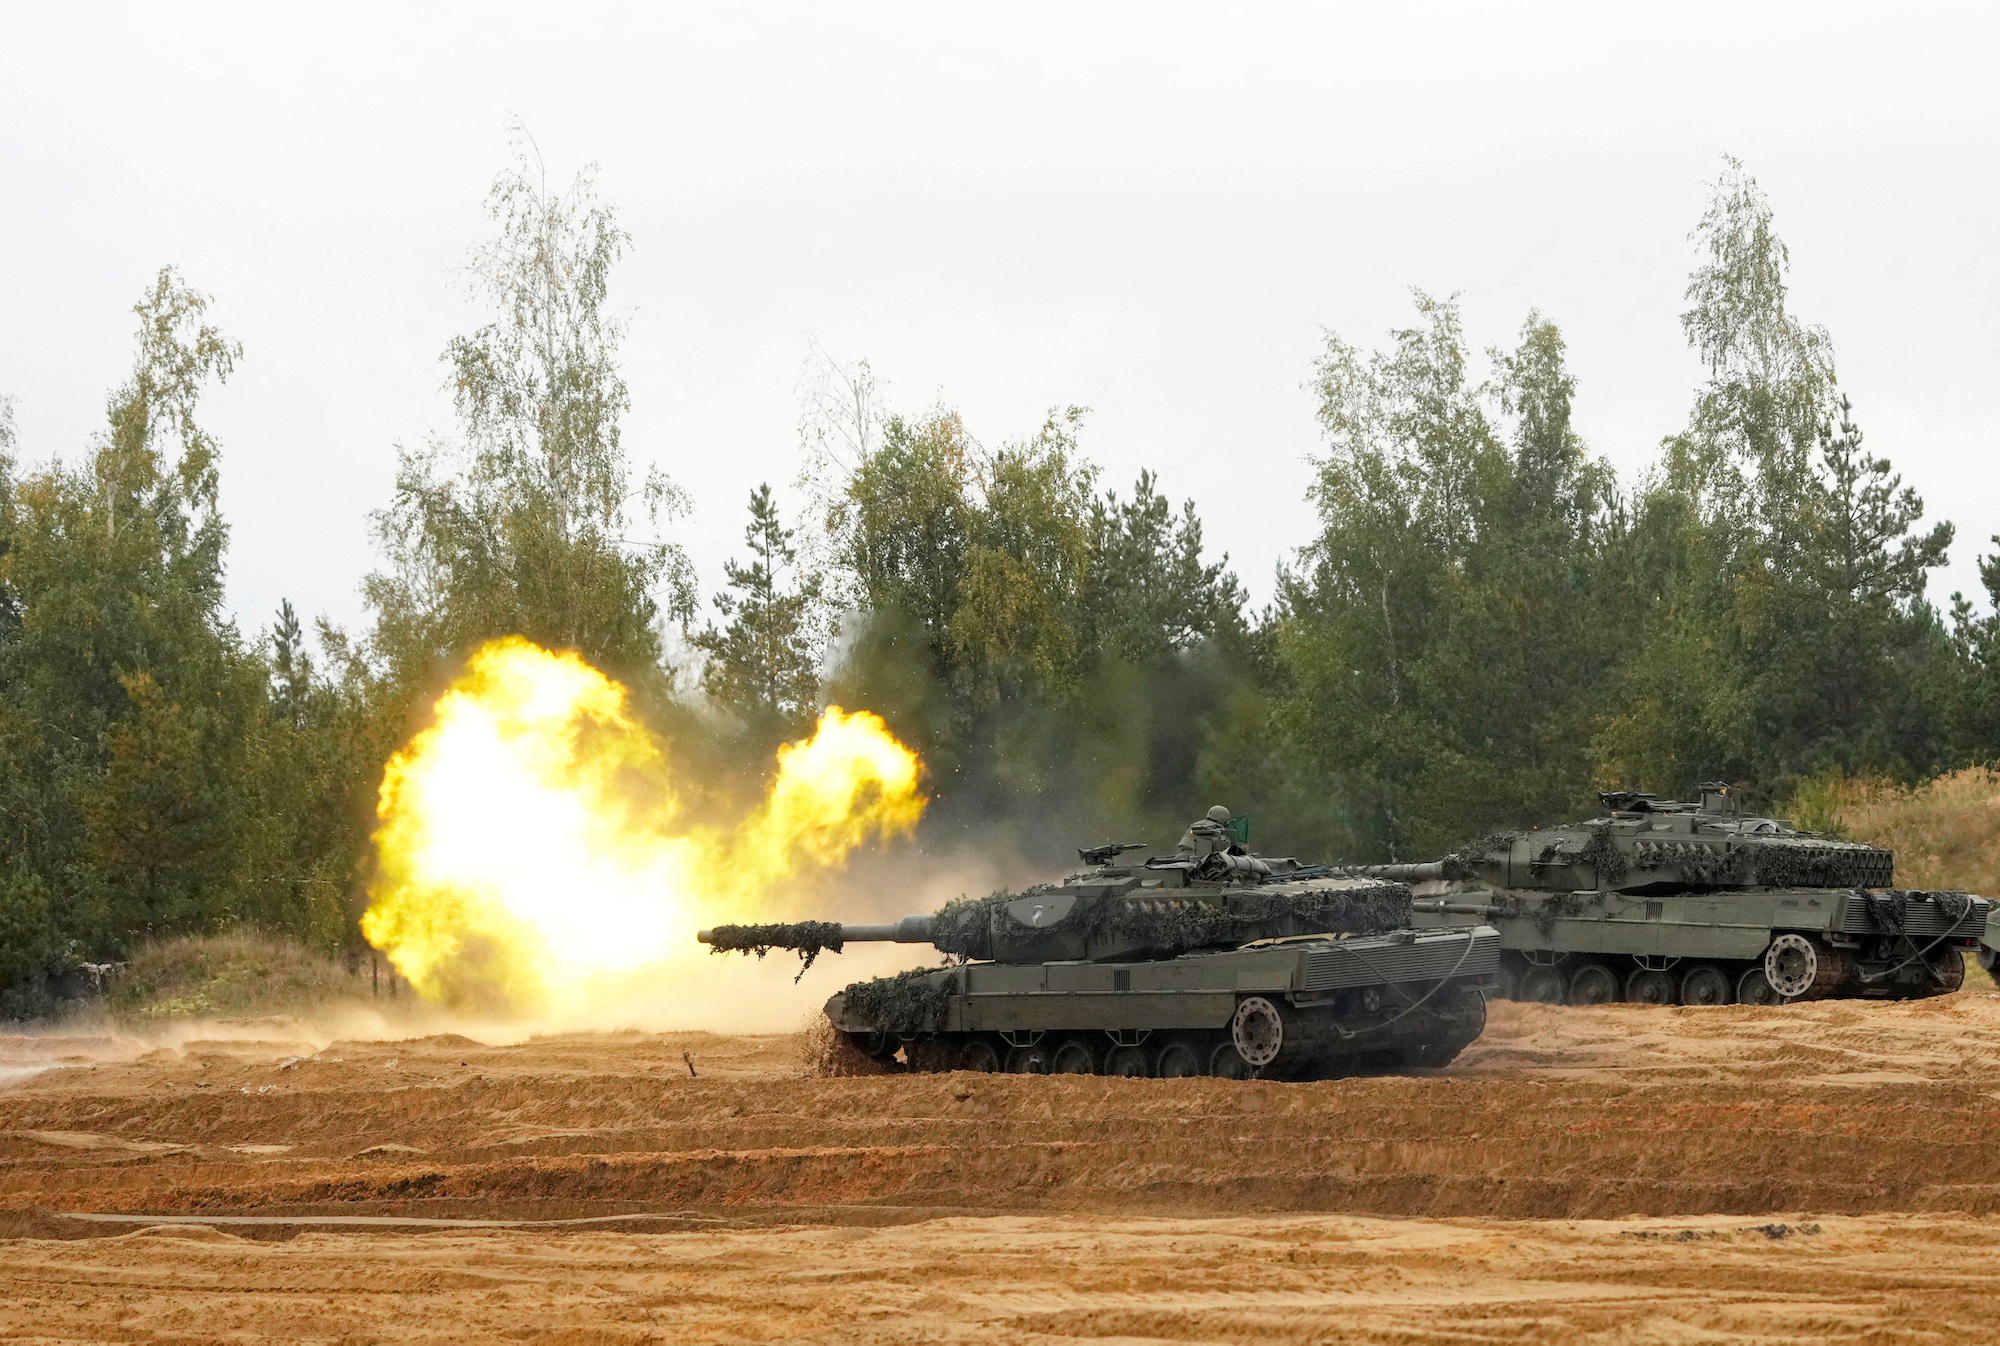 During the final stage of a military exercise in Latvia on September 29, 2022, a Spanish Leopard 2 tank caught fire.